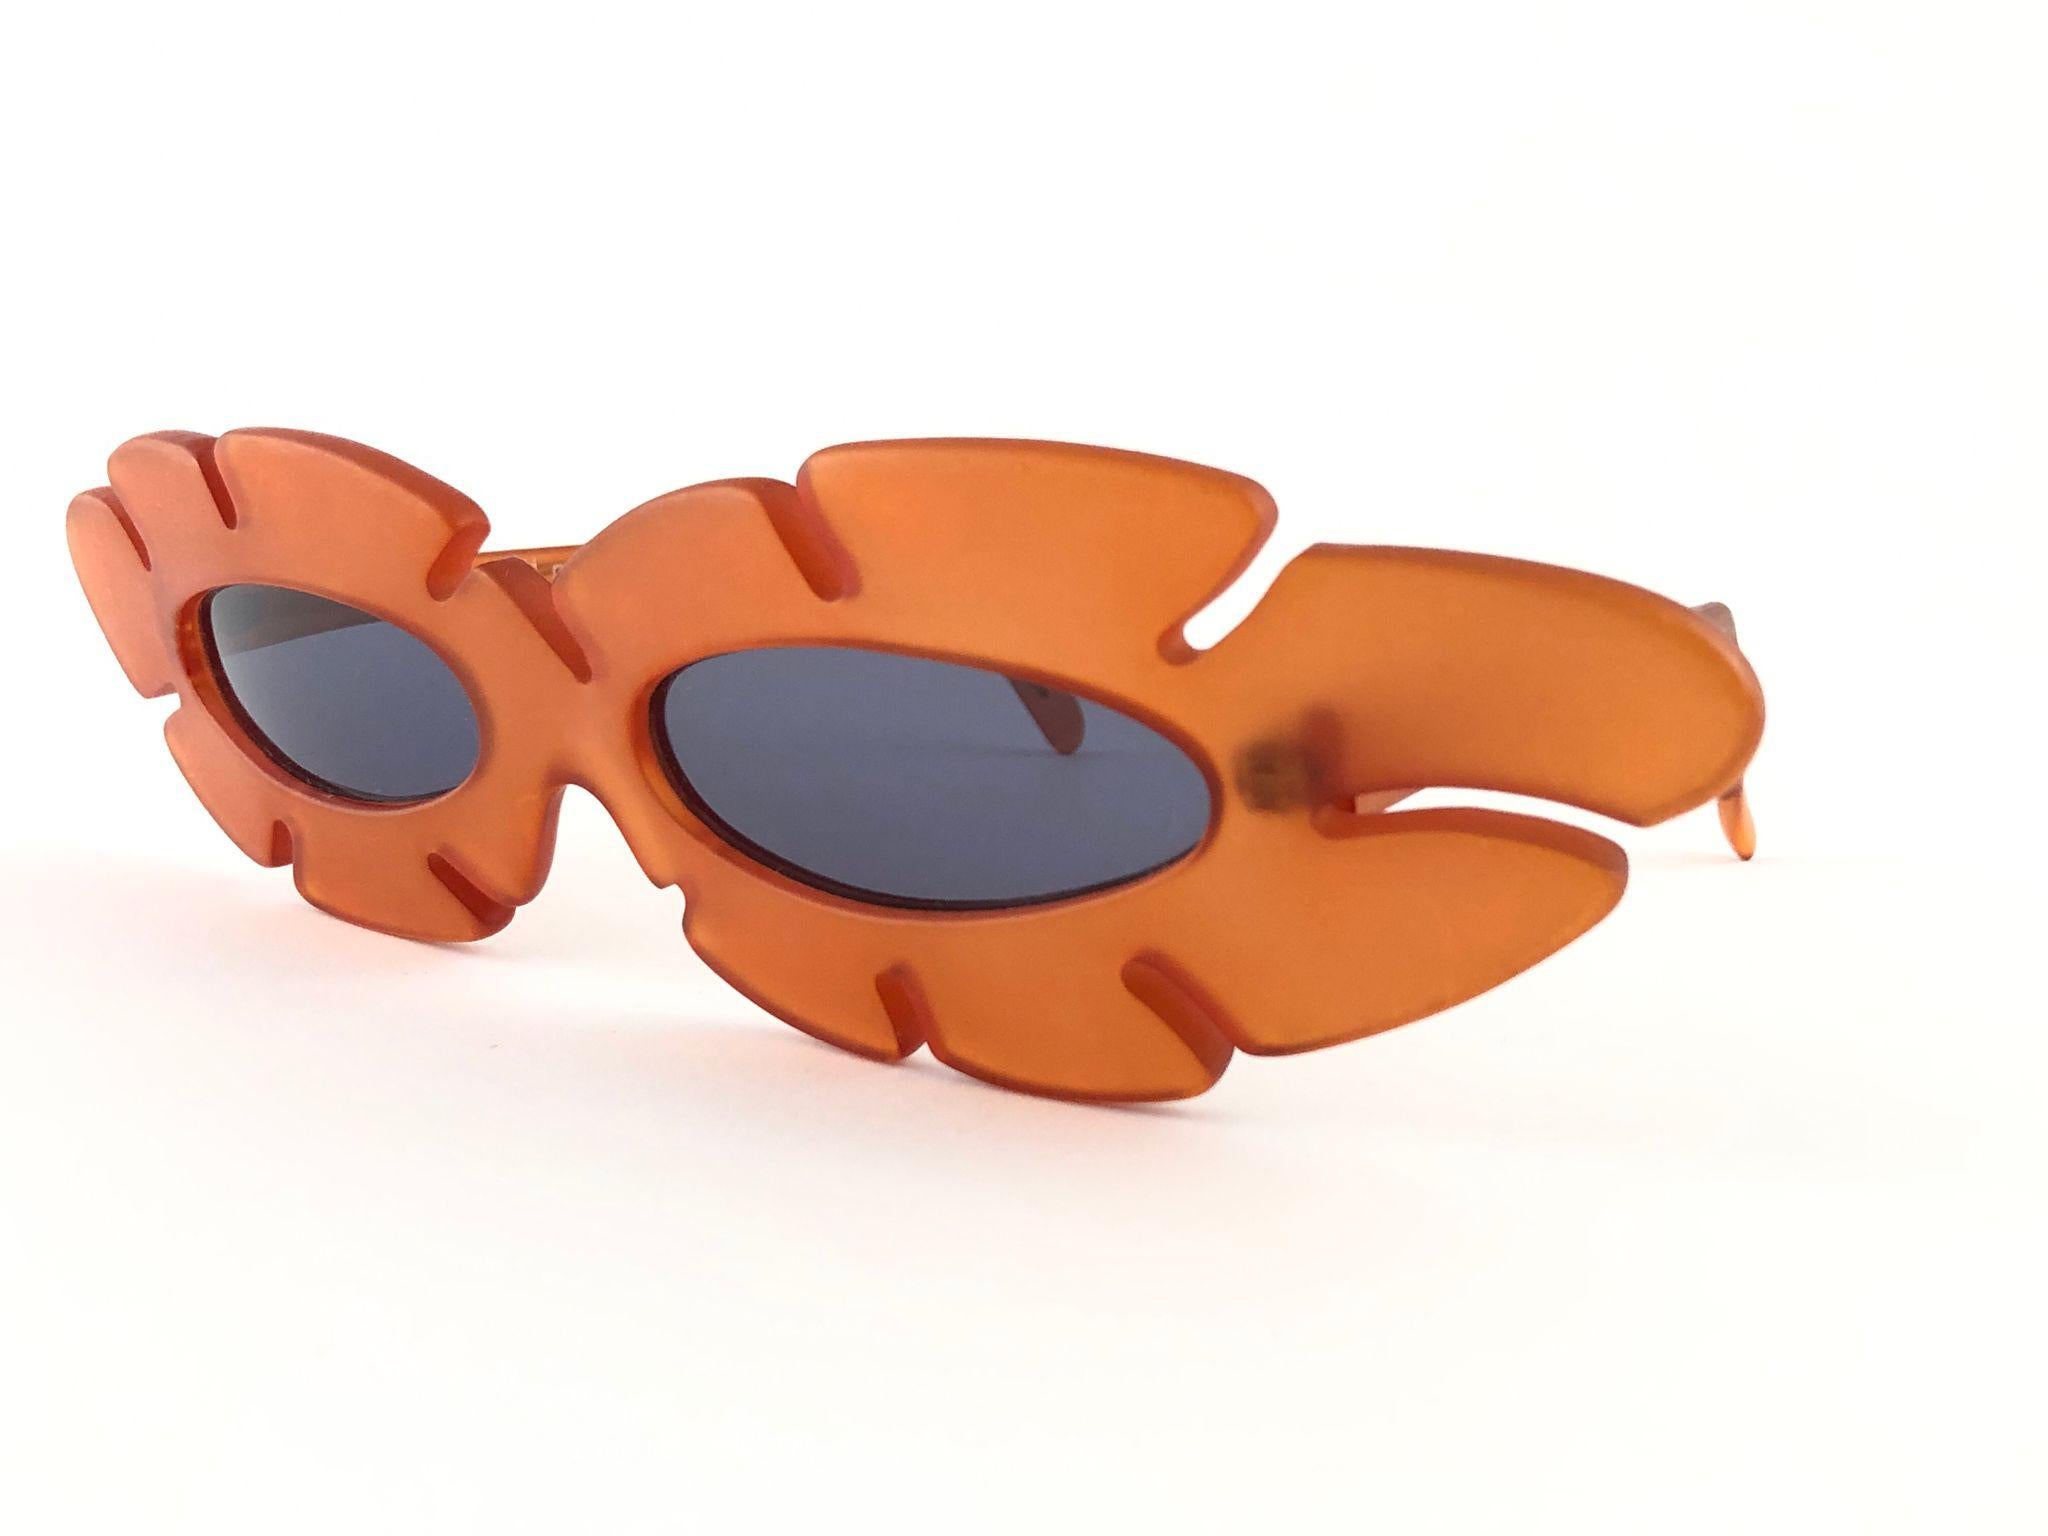 New Vintage Alain Mikli ultra wide translucent tangerine frame.

Rare item in new and unworn condition. Spotless grey lenses.

Please consider that this item is nearly 40 years old so it could show minor sign of wear due to storage.

Made in